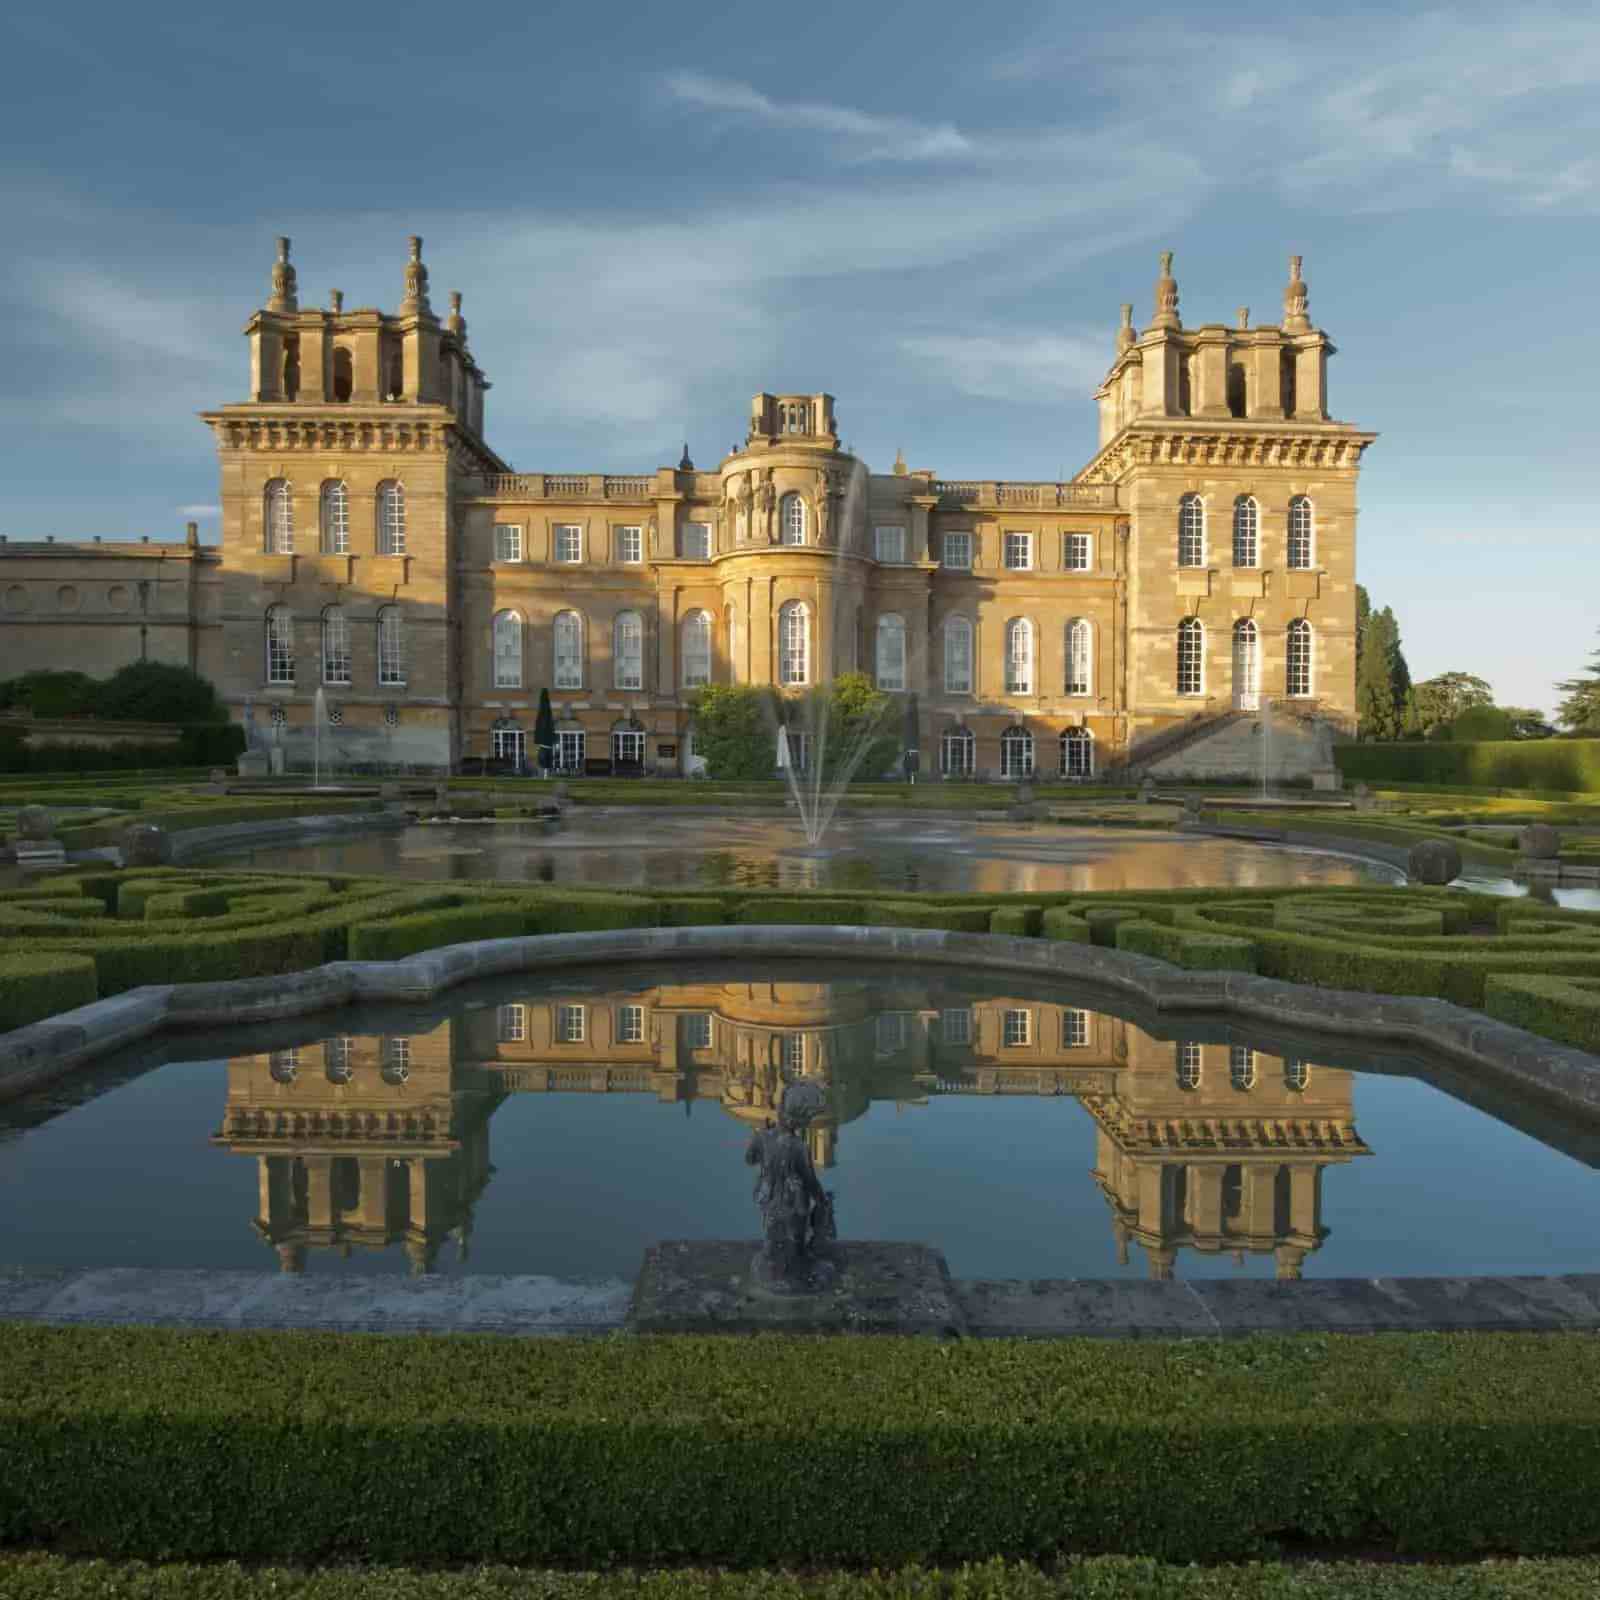 Blenheim Palace was built as a gesture of thanks